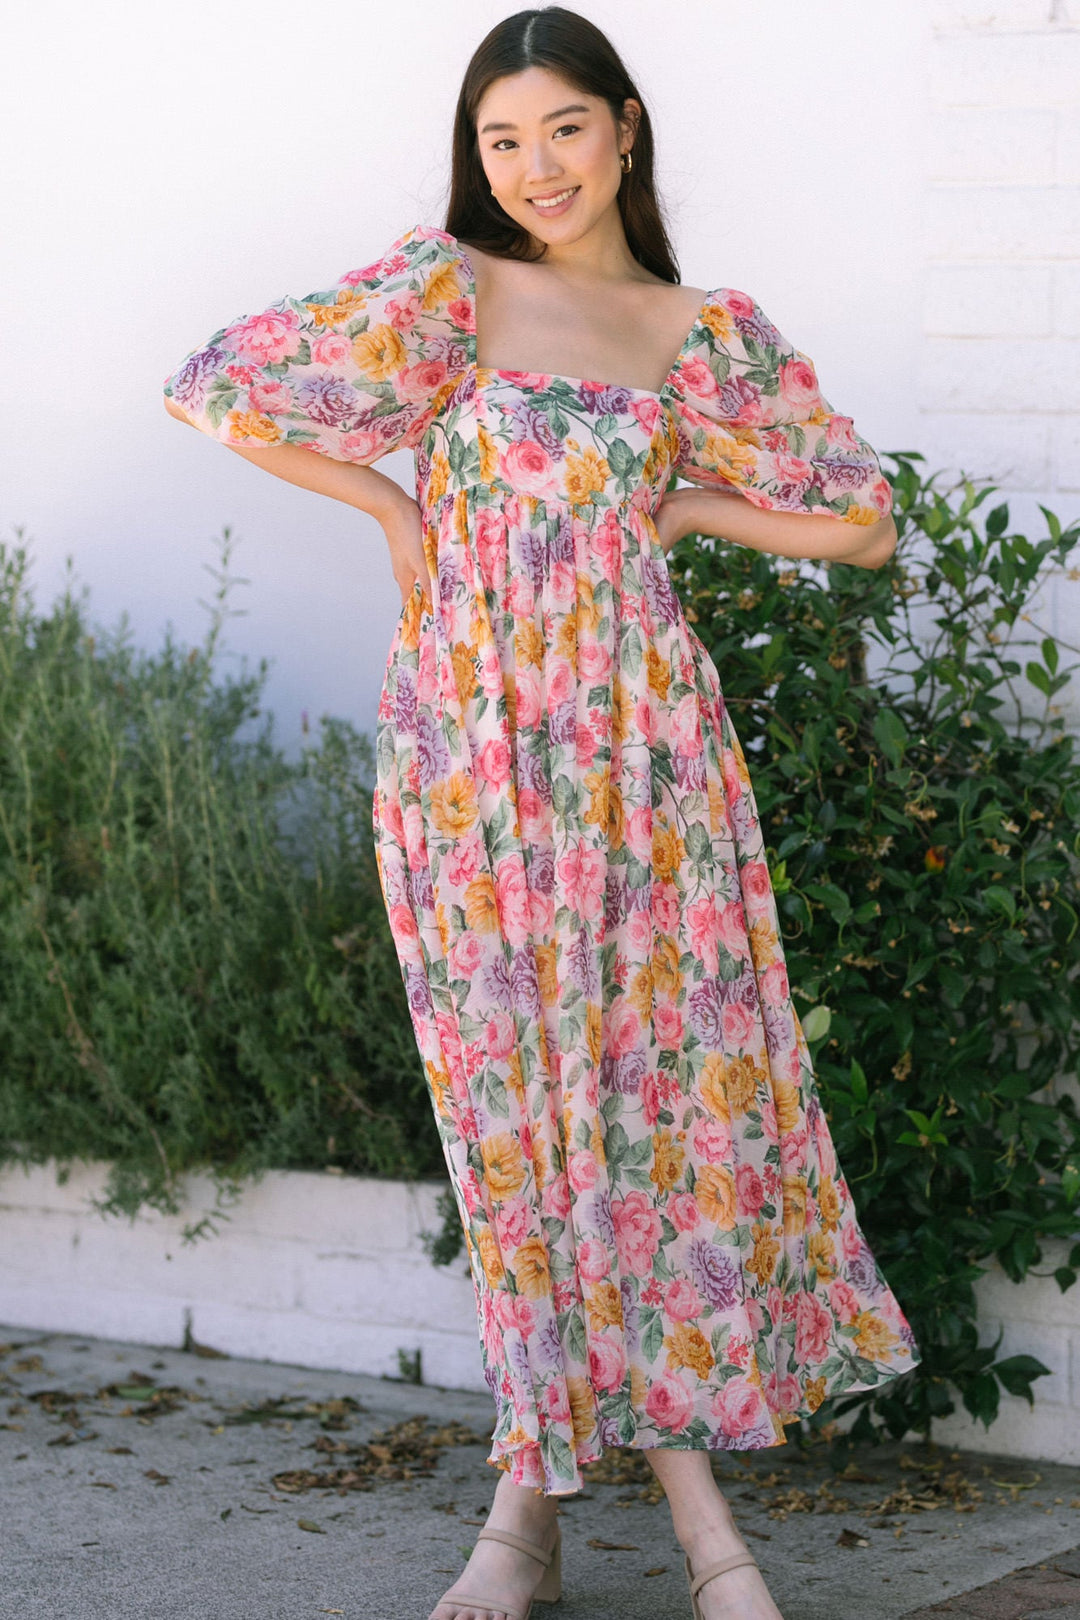 Ask BB: Cute Cheap Maxi Dresses for Large Busted Women - The